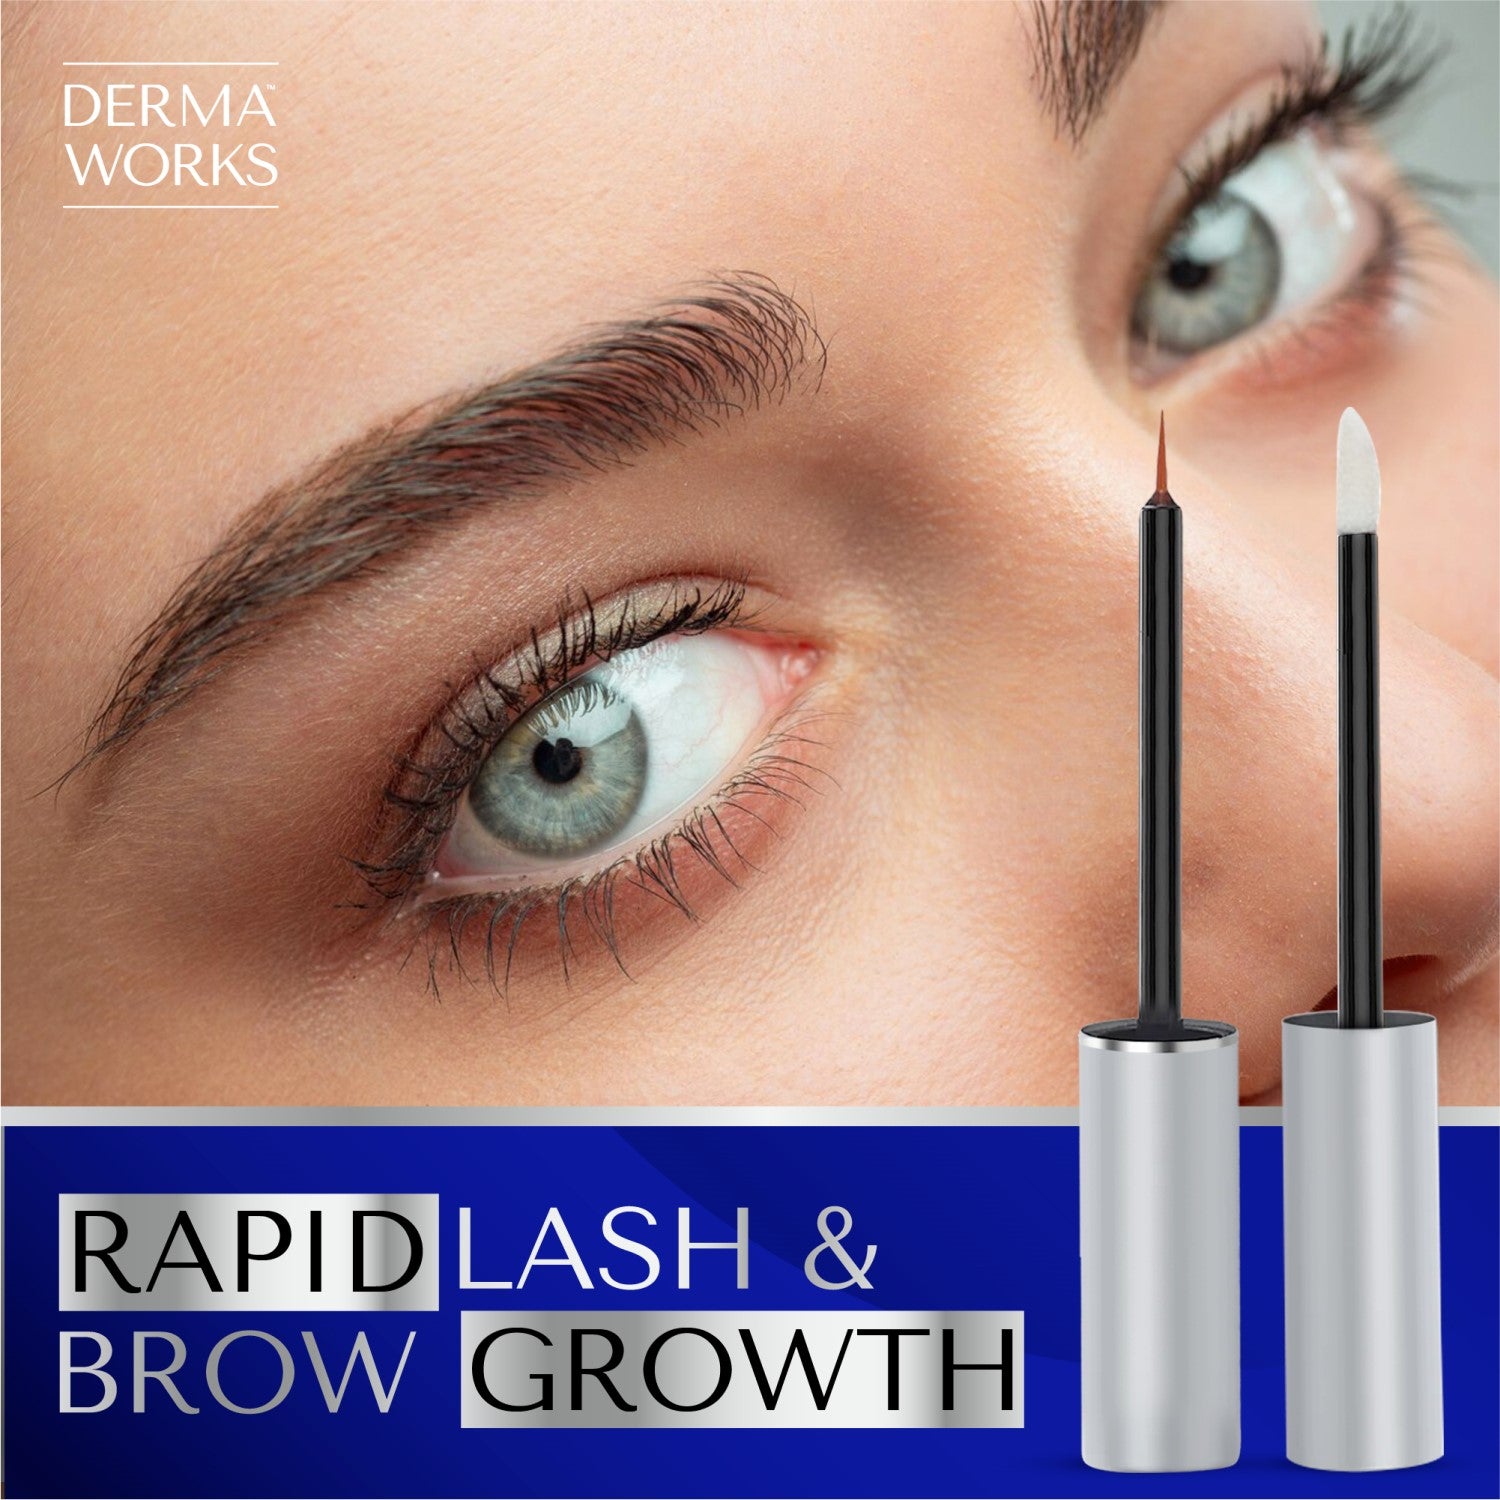 Rapid lash and brow growth with a duo of serums - Spectaculash advanced lash serum and brow enhancing serum